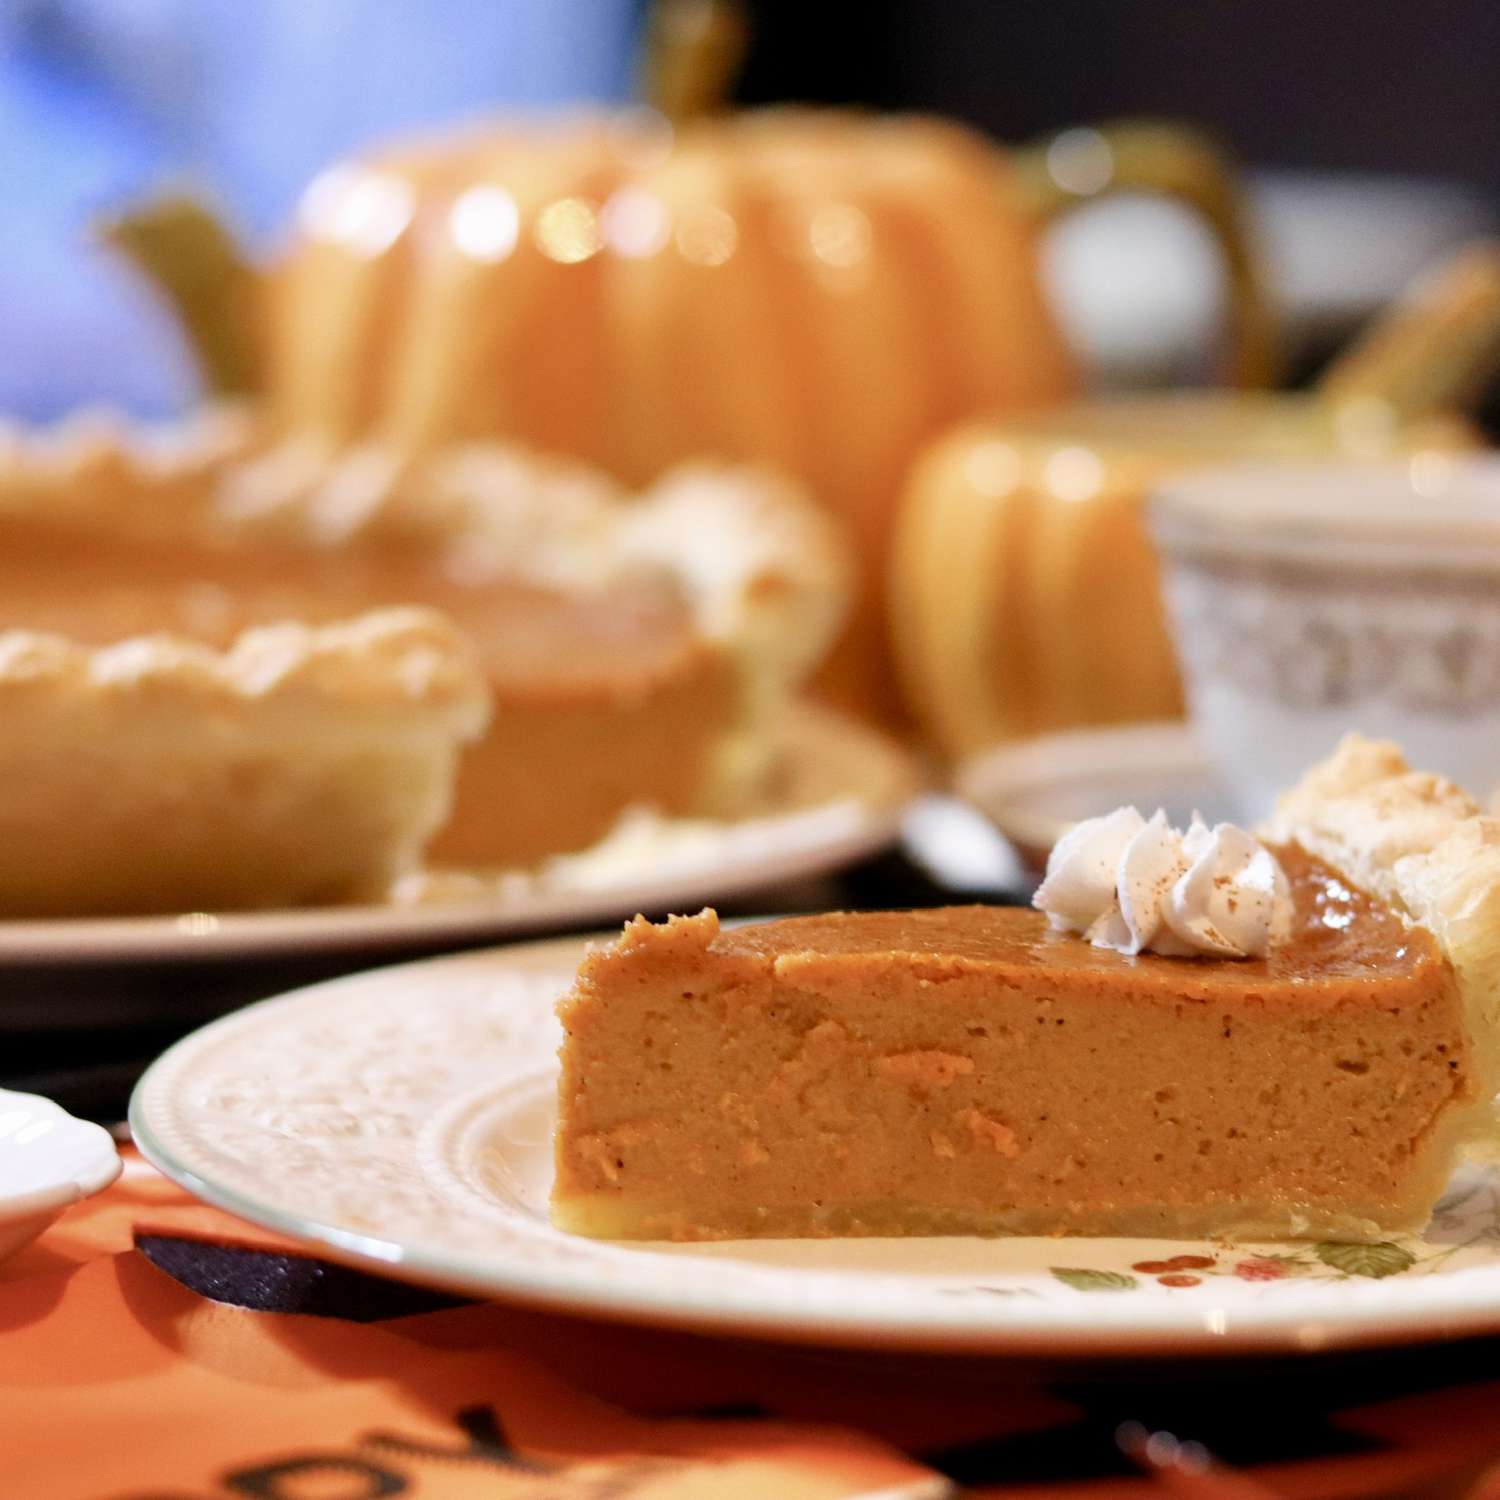 A slice of pumpkin pie on a plate in the foreground, with a whole pie behind it